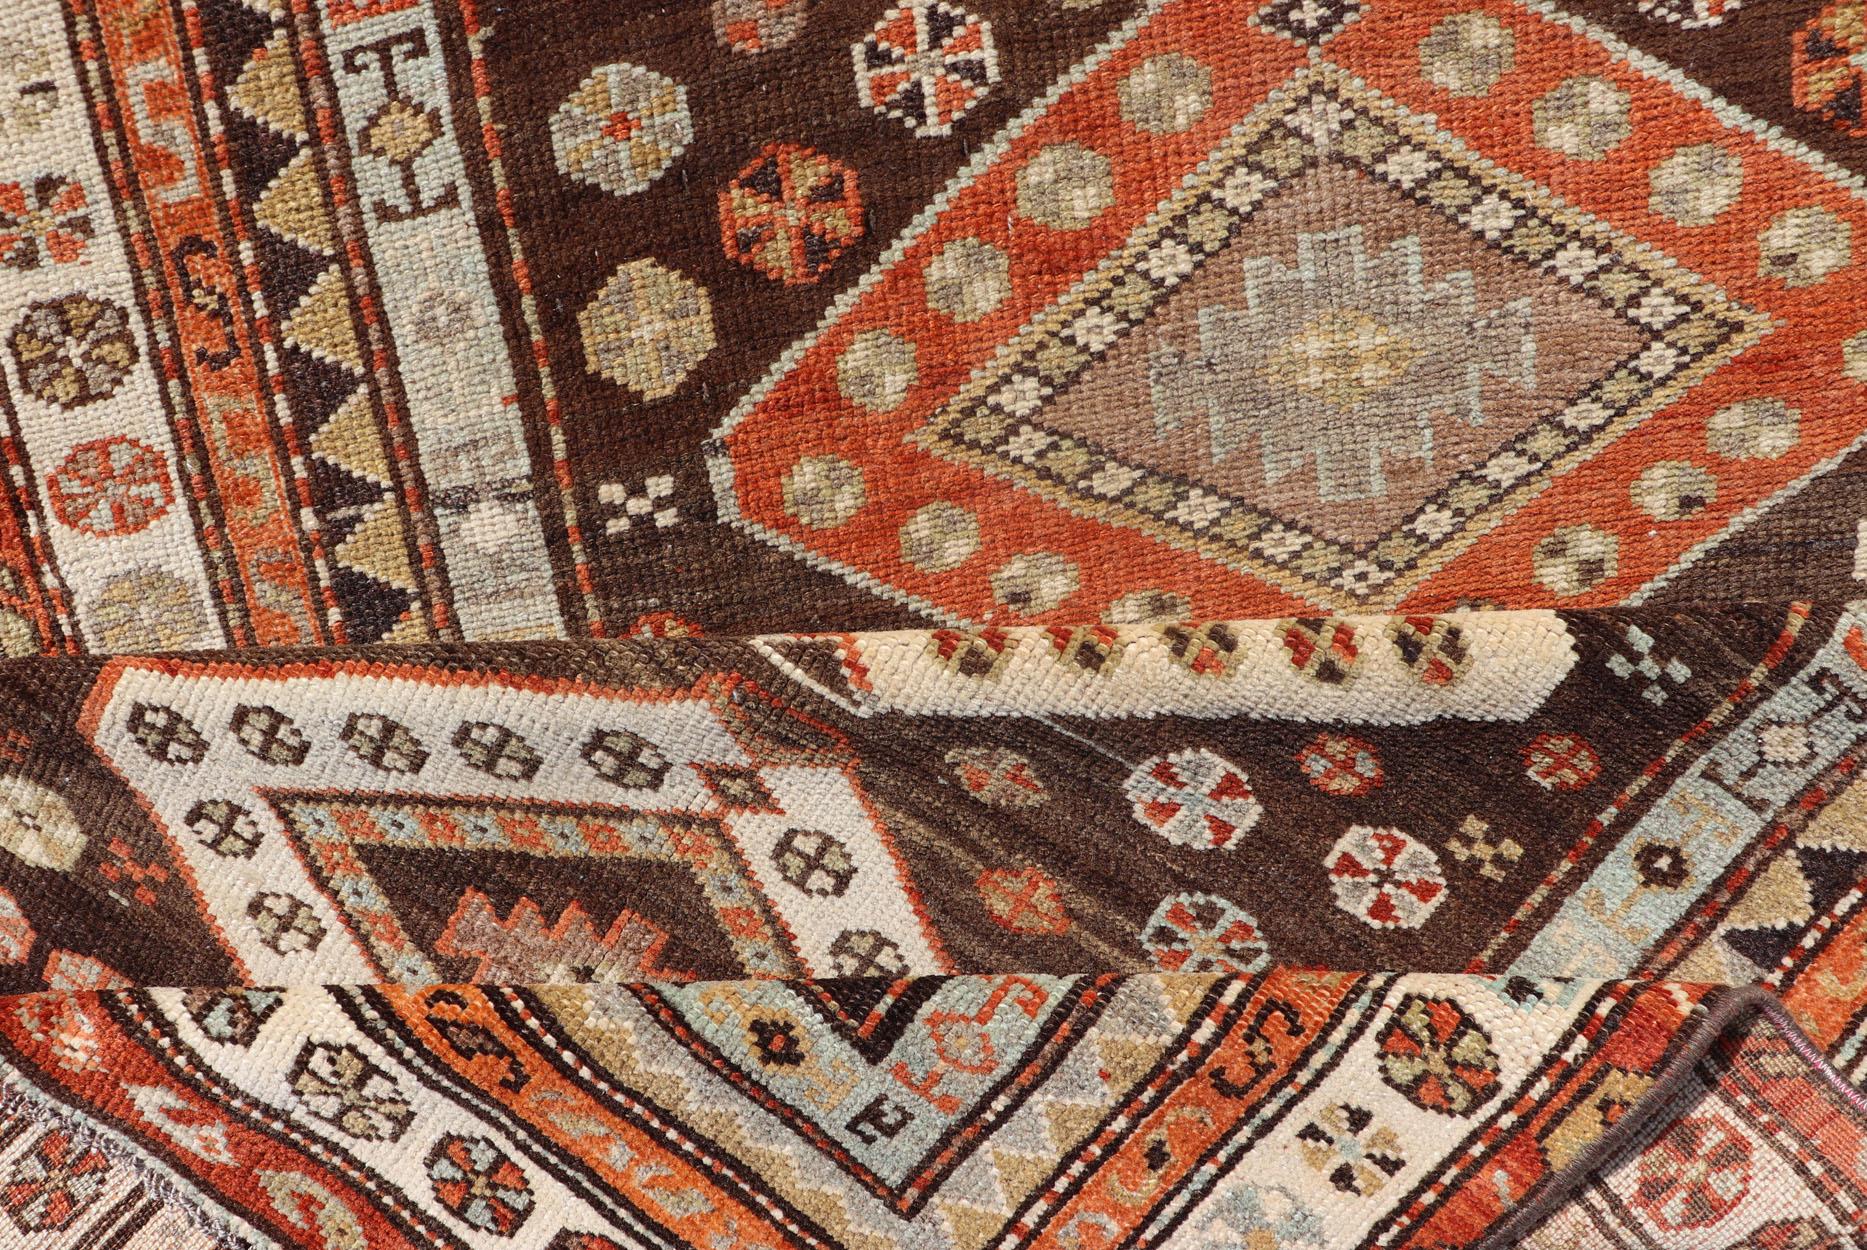 Long Persian Kurdish Runner with Medallion Design in Brown, Orange and Cream In Excellent Condition For Sale In Atlanta, GA